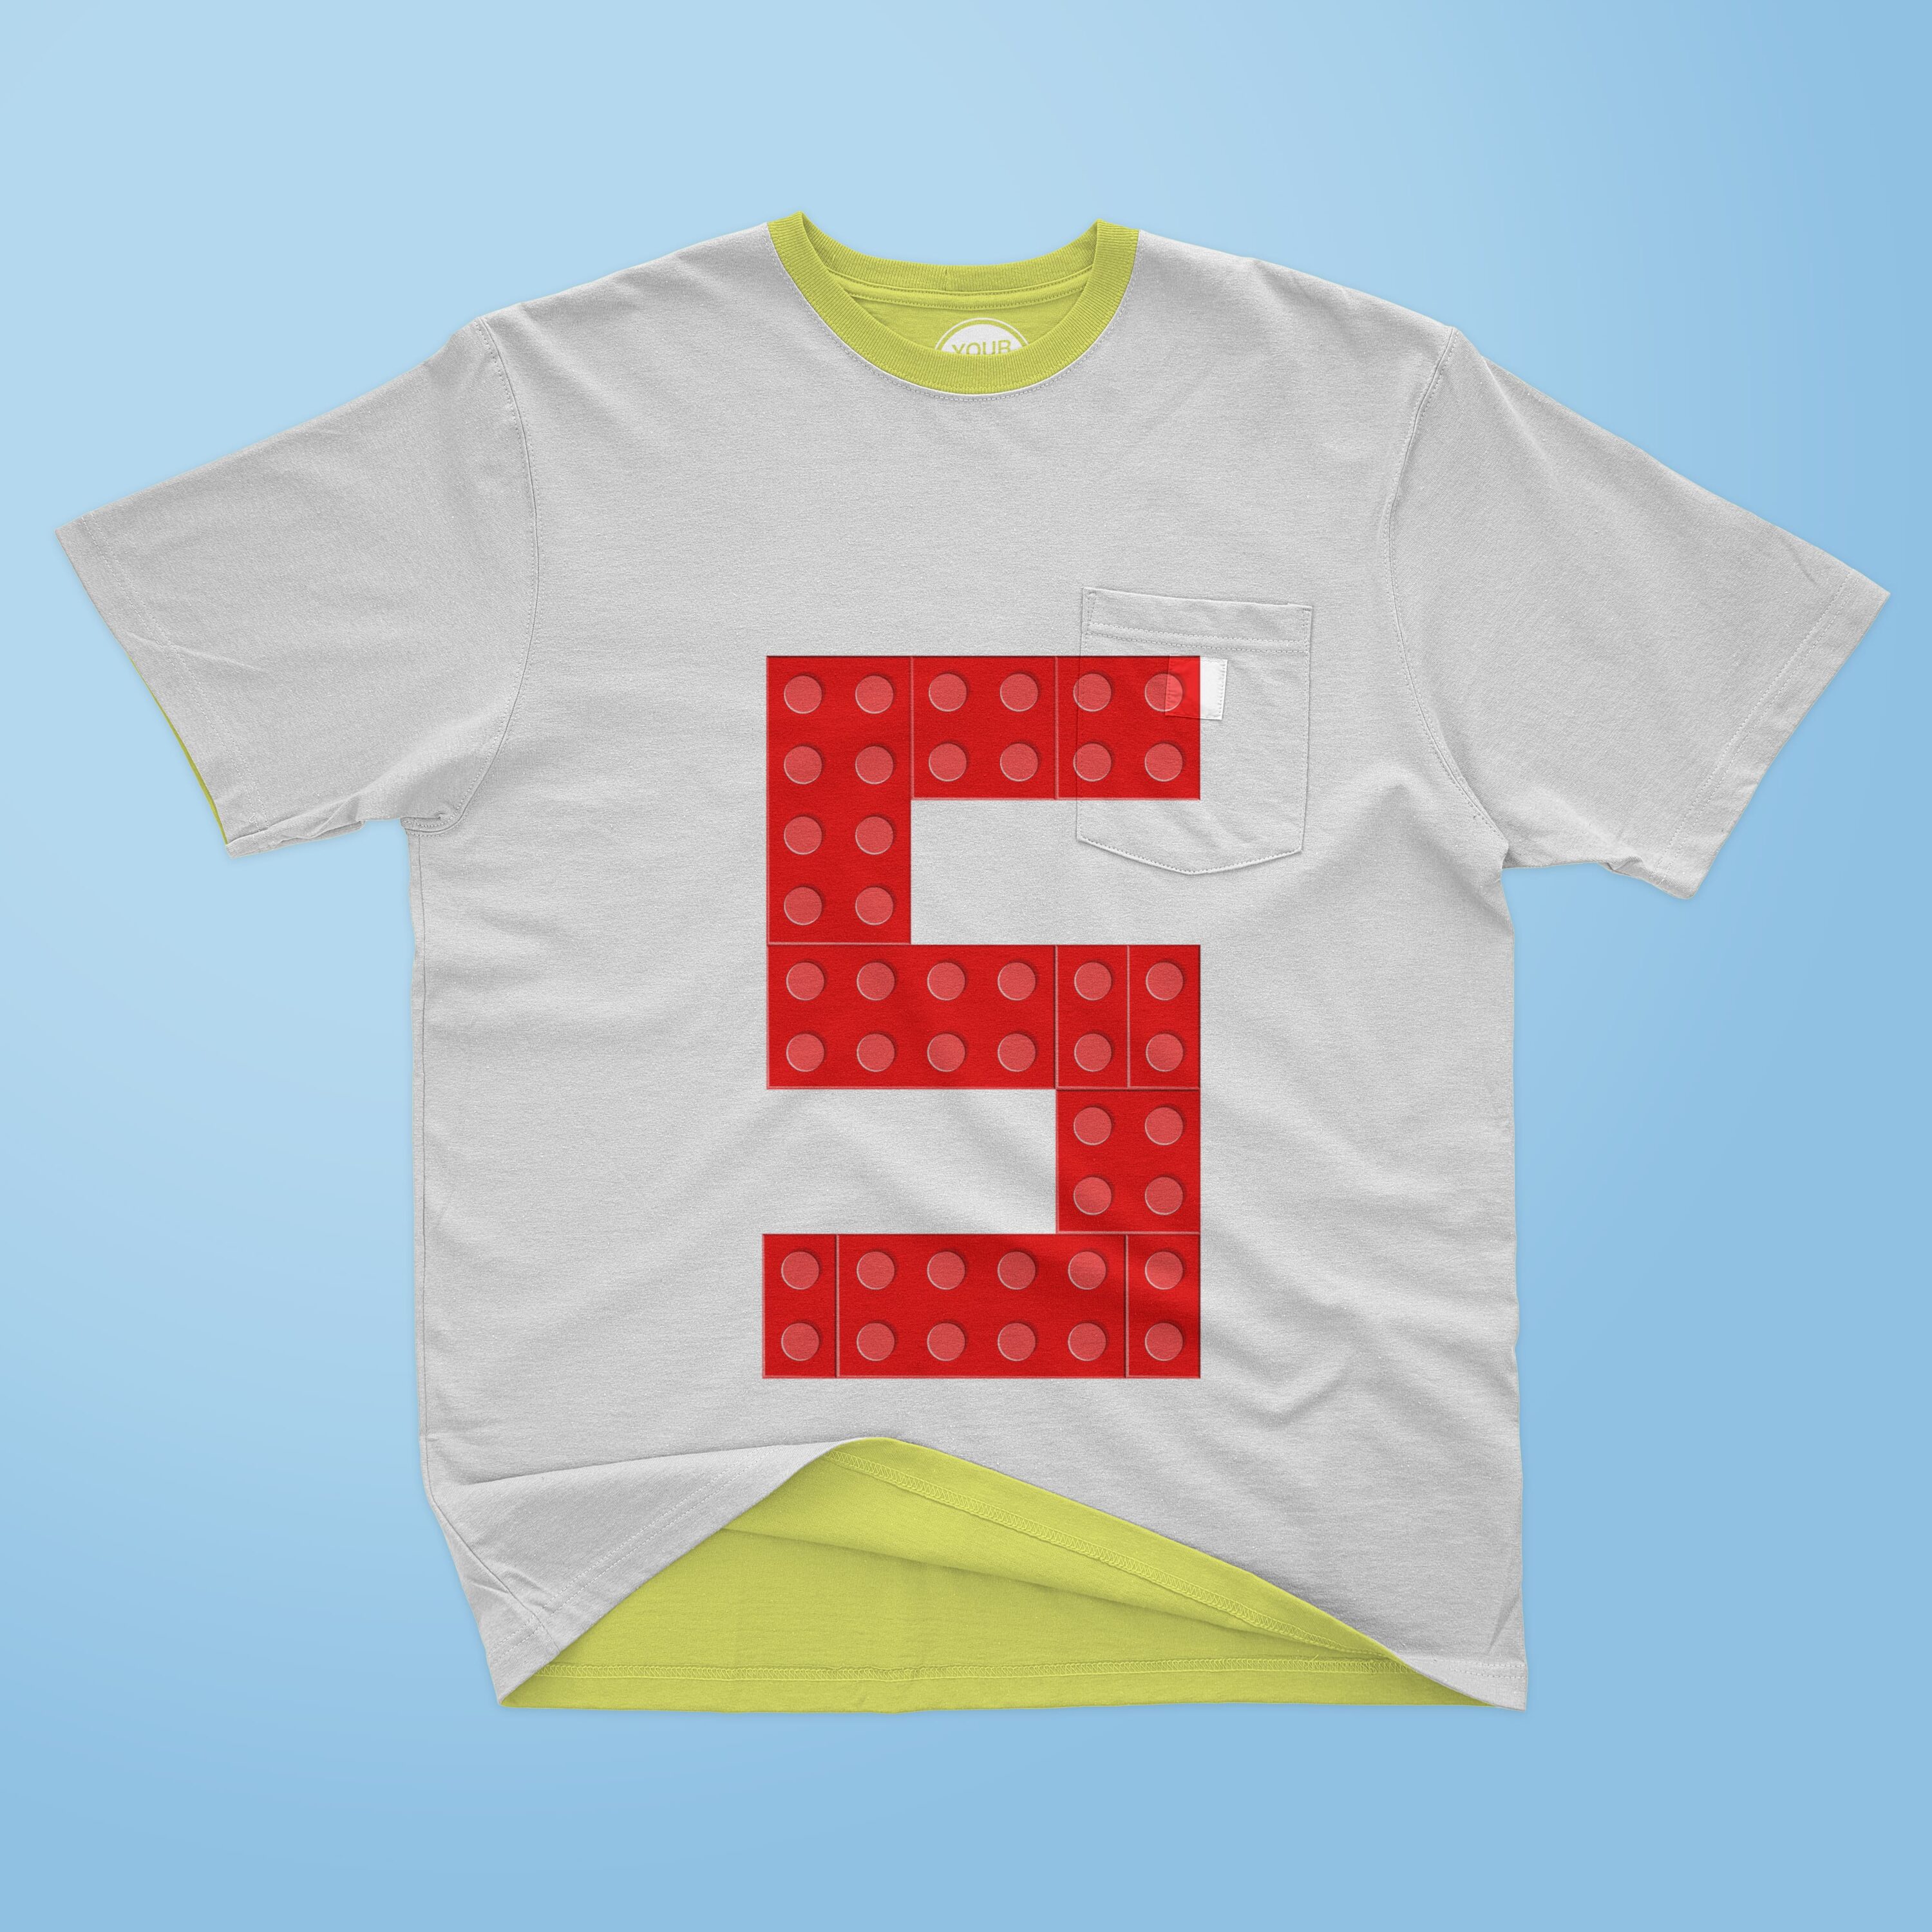 Number 5 made from red lego bricks - t-shirt design.